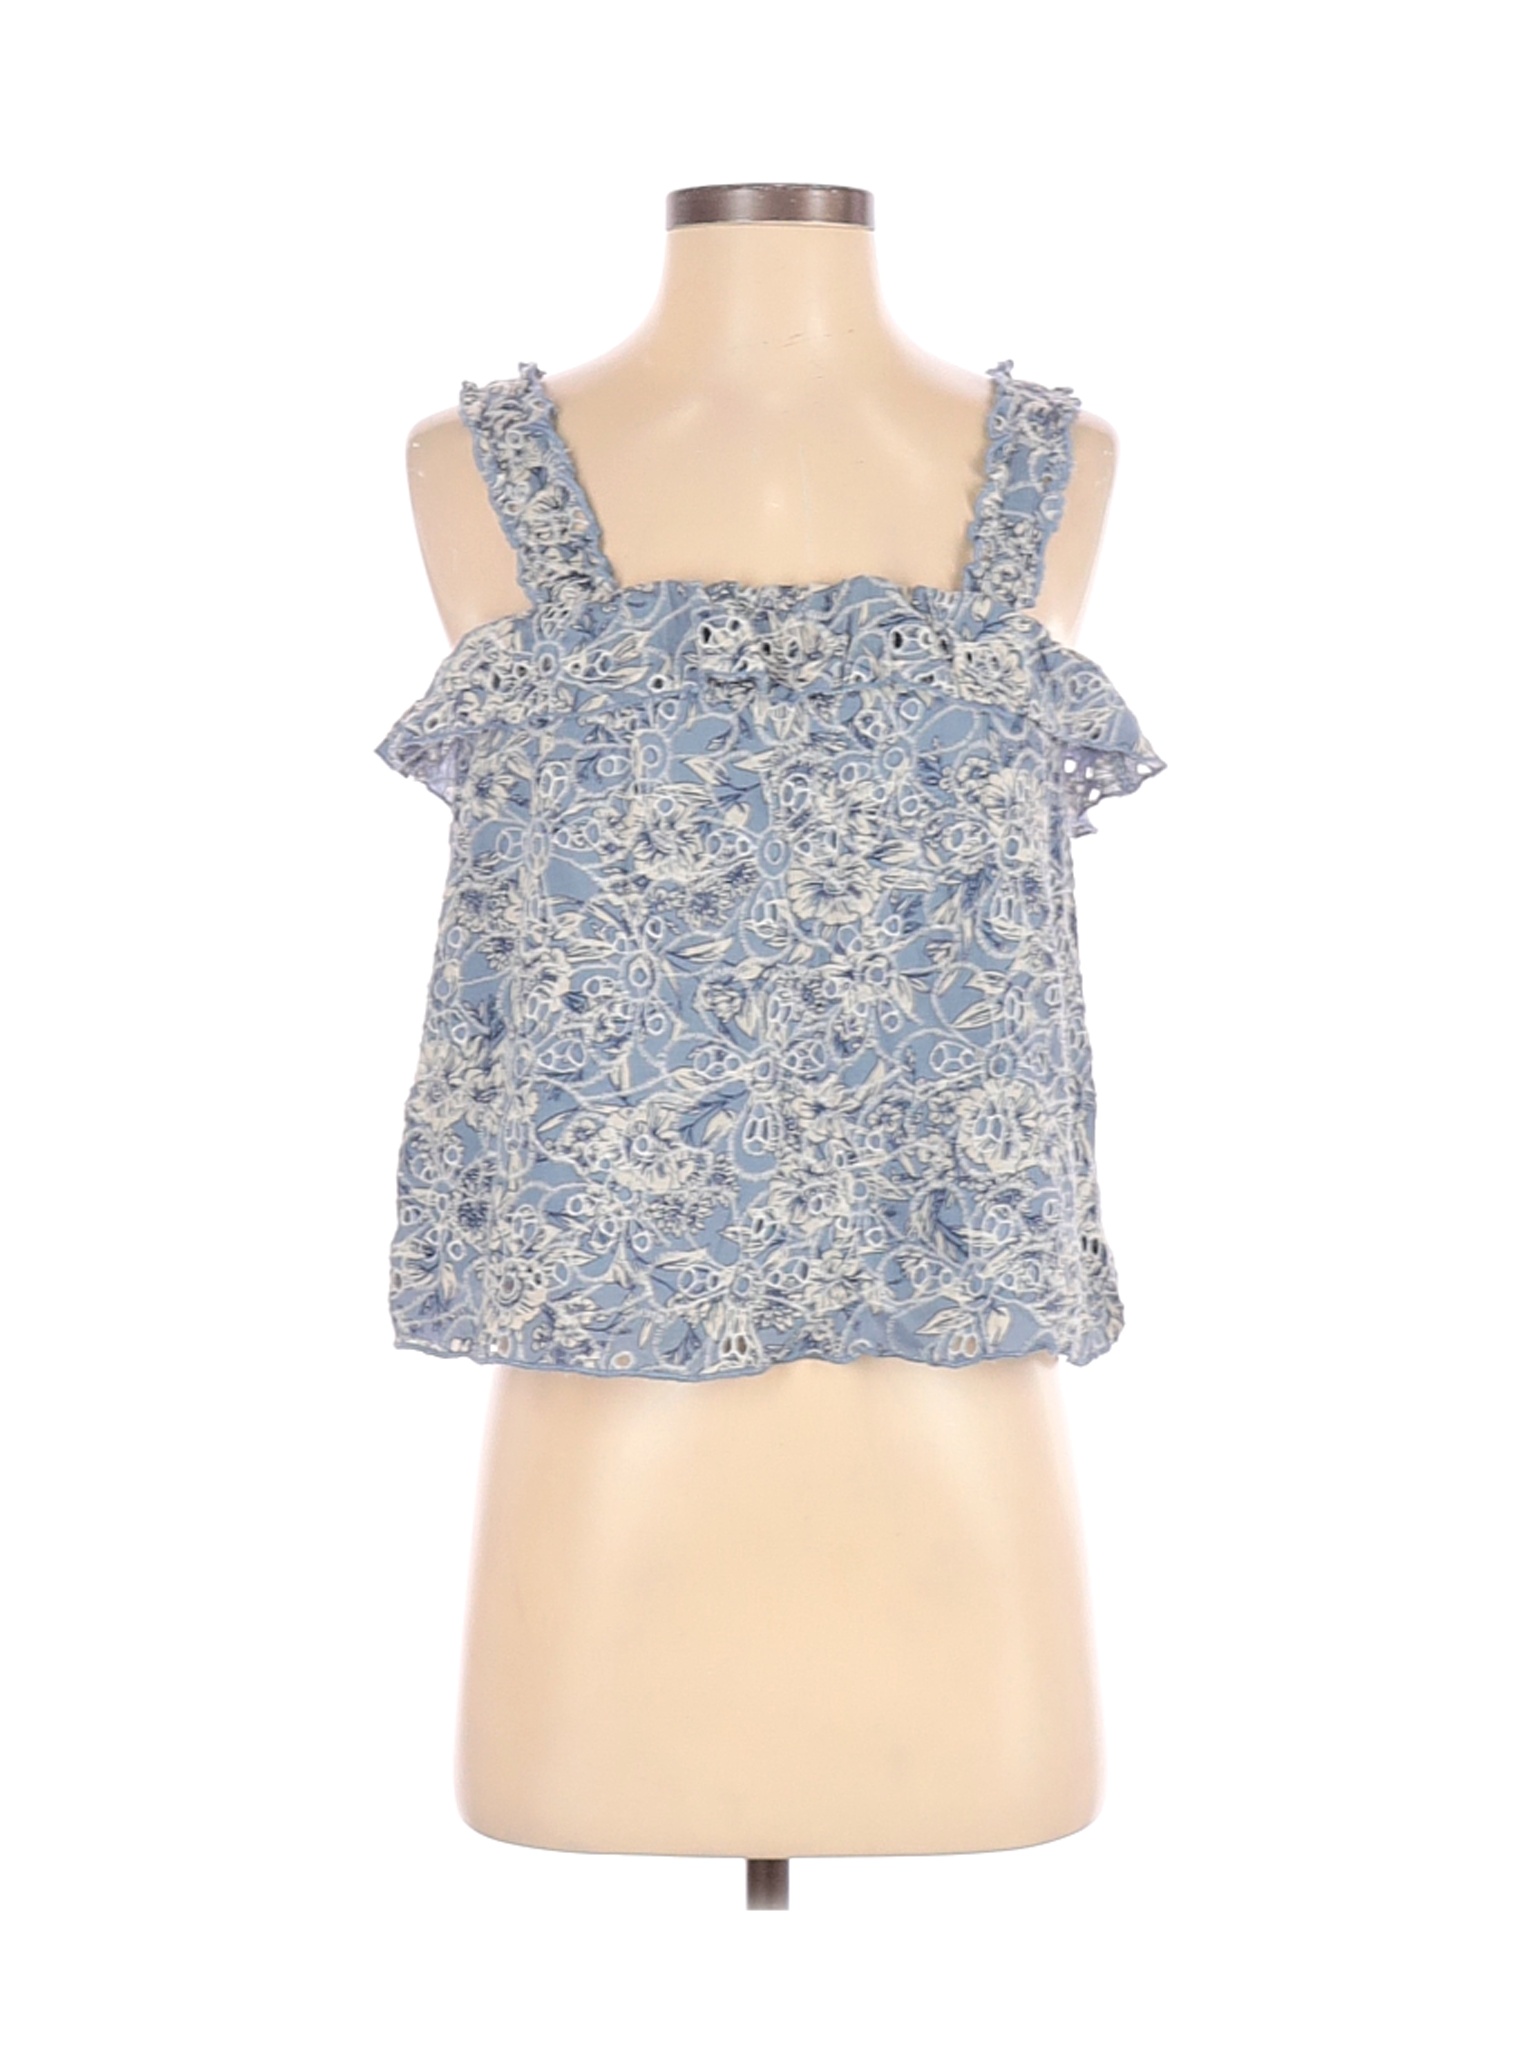 American Eagle Outfitters Women Blue Sleeveless Blouse XS | eBay